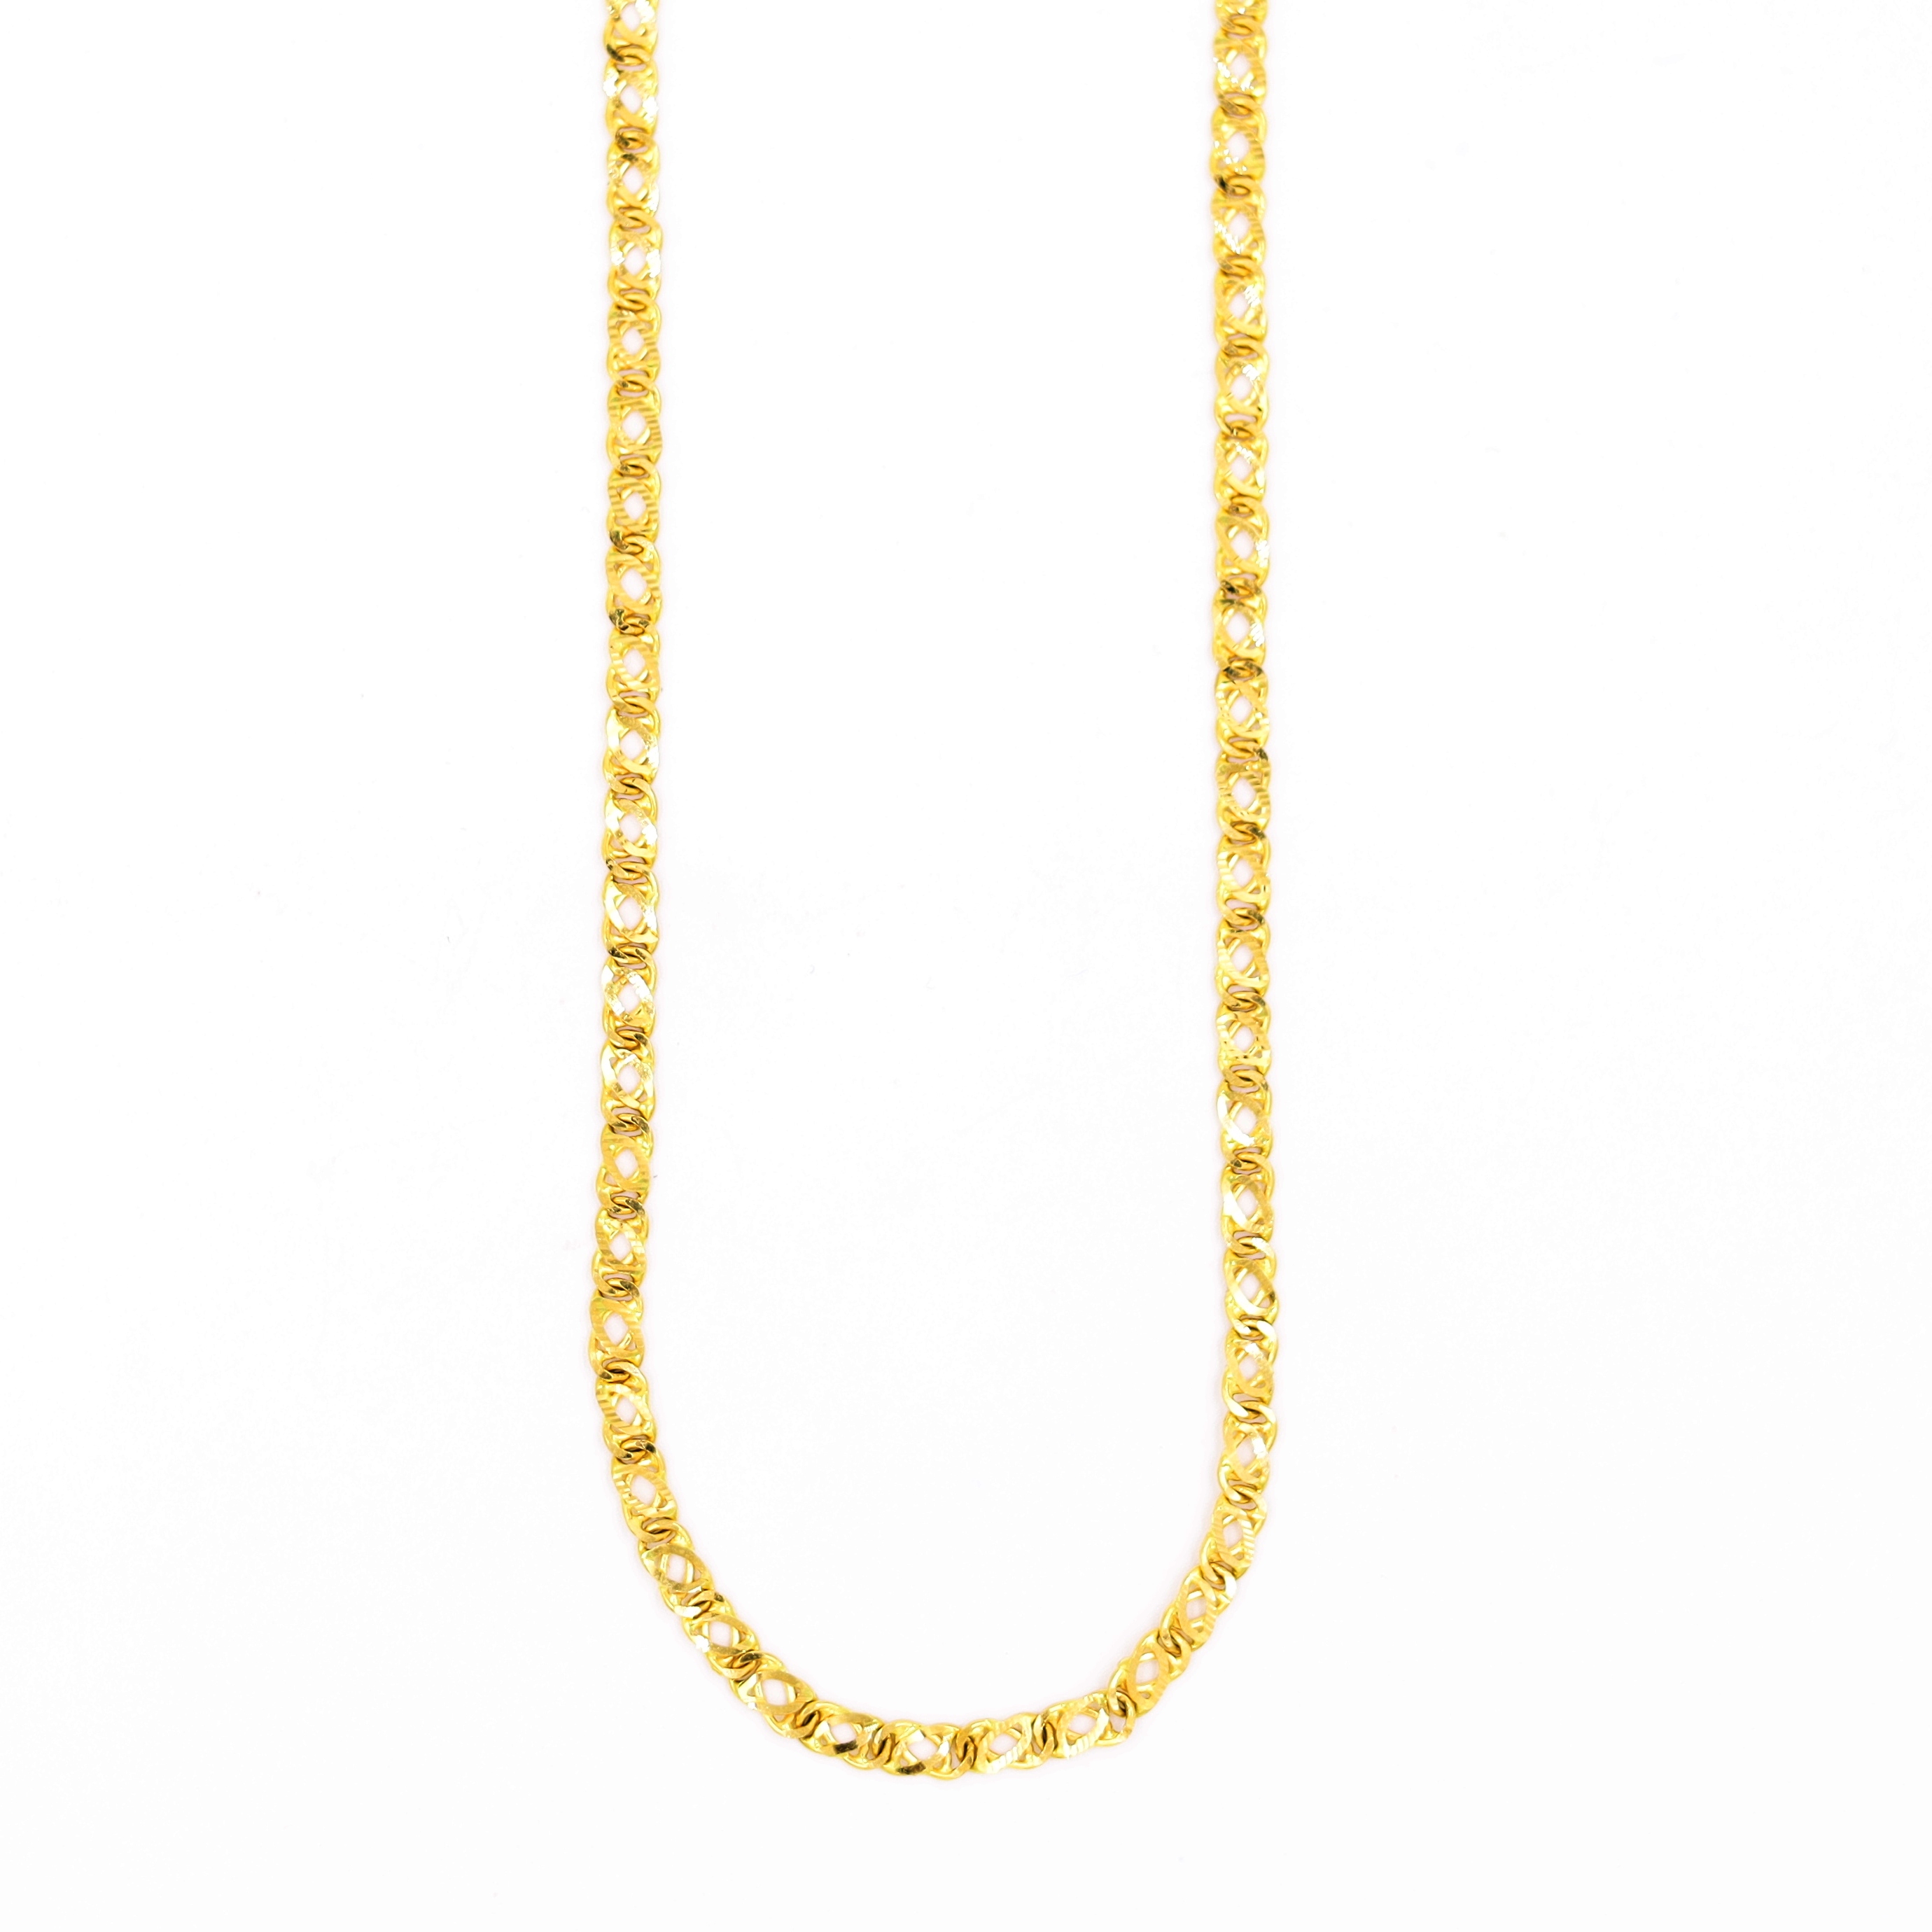 Modern Link Style Hand Made Gold Chain